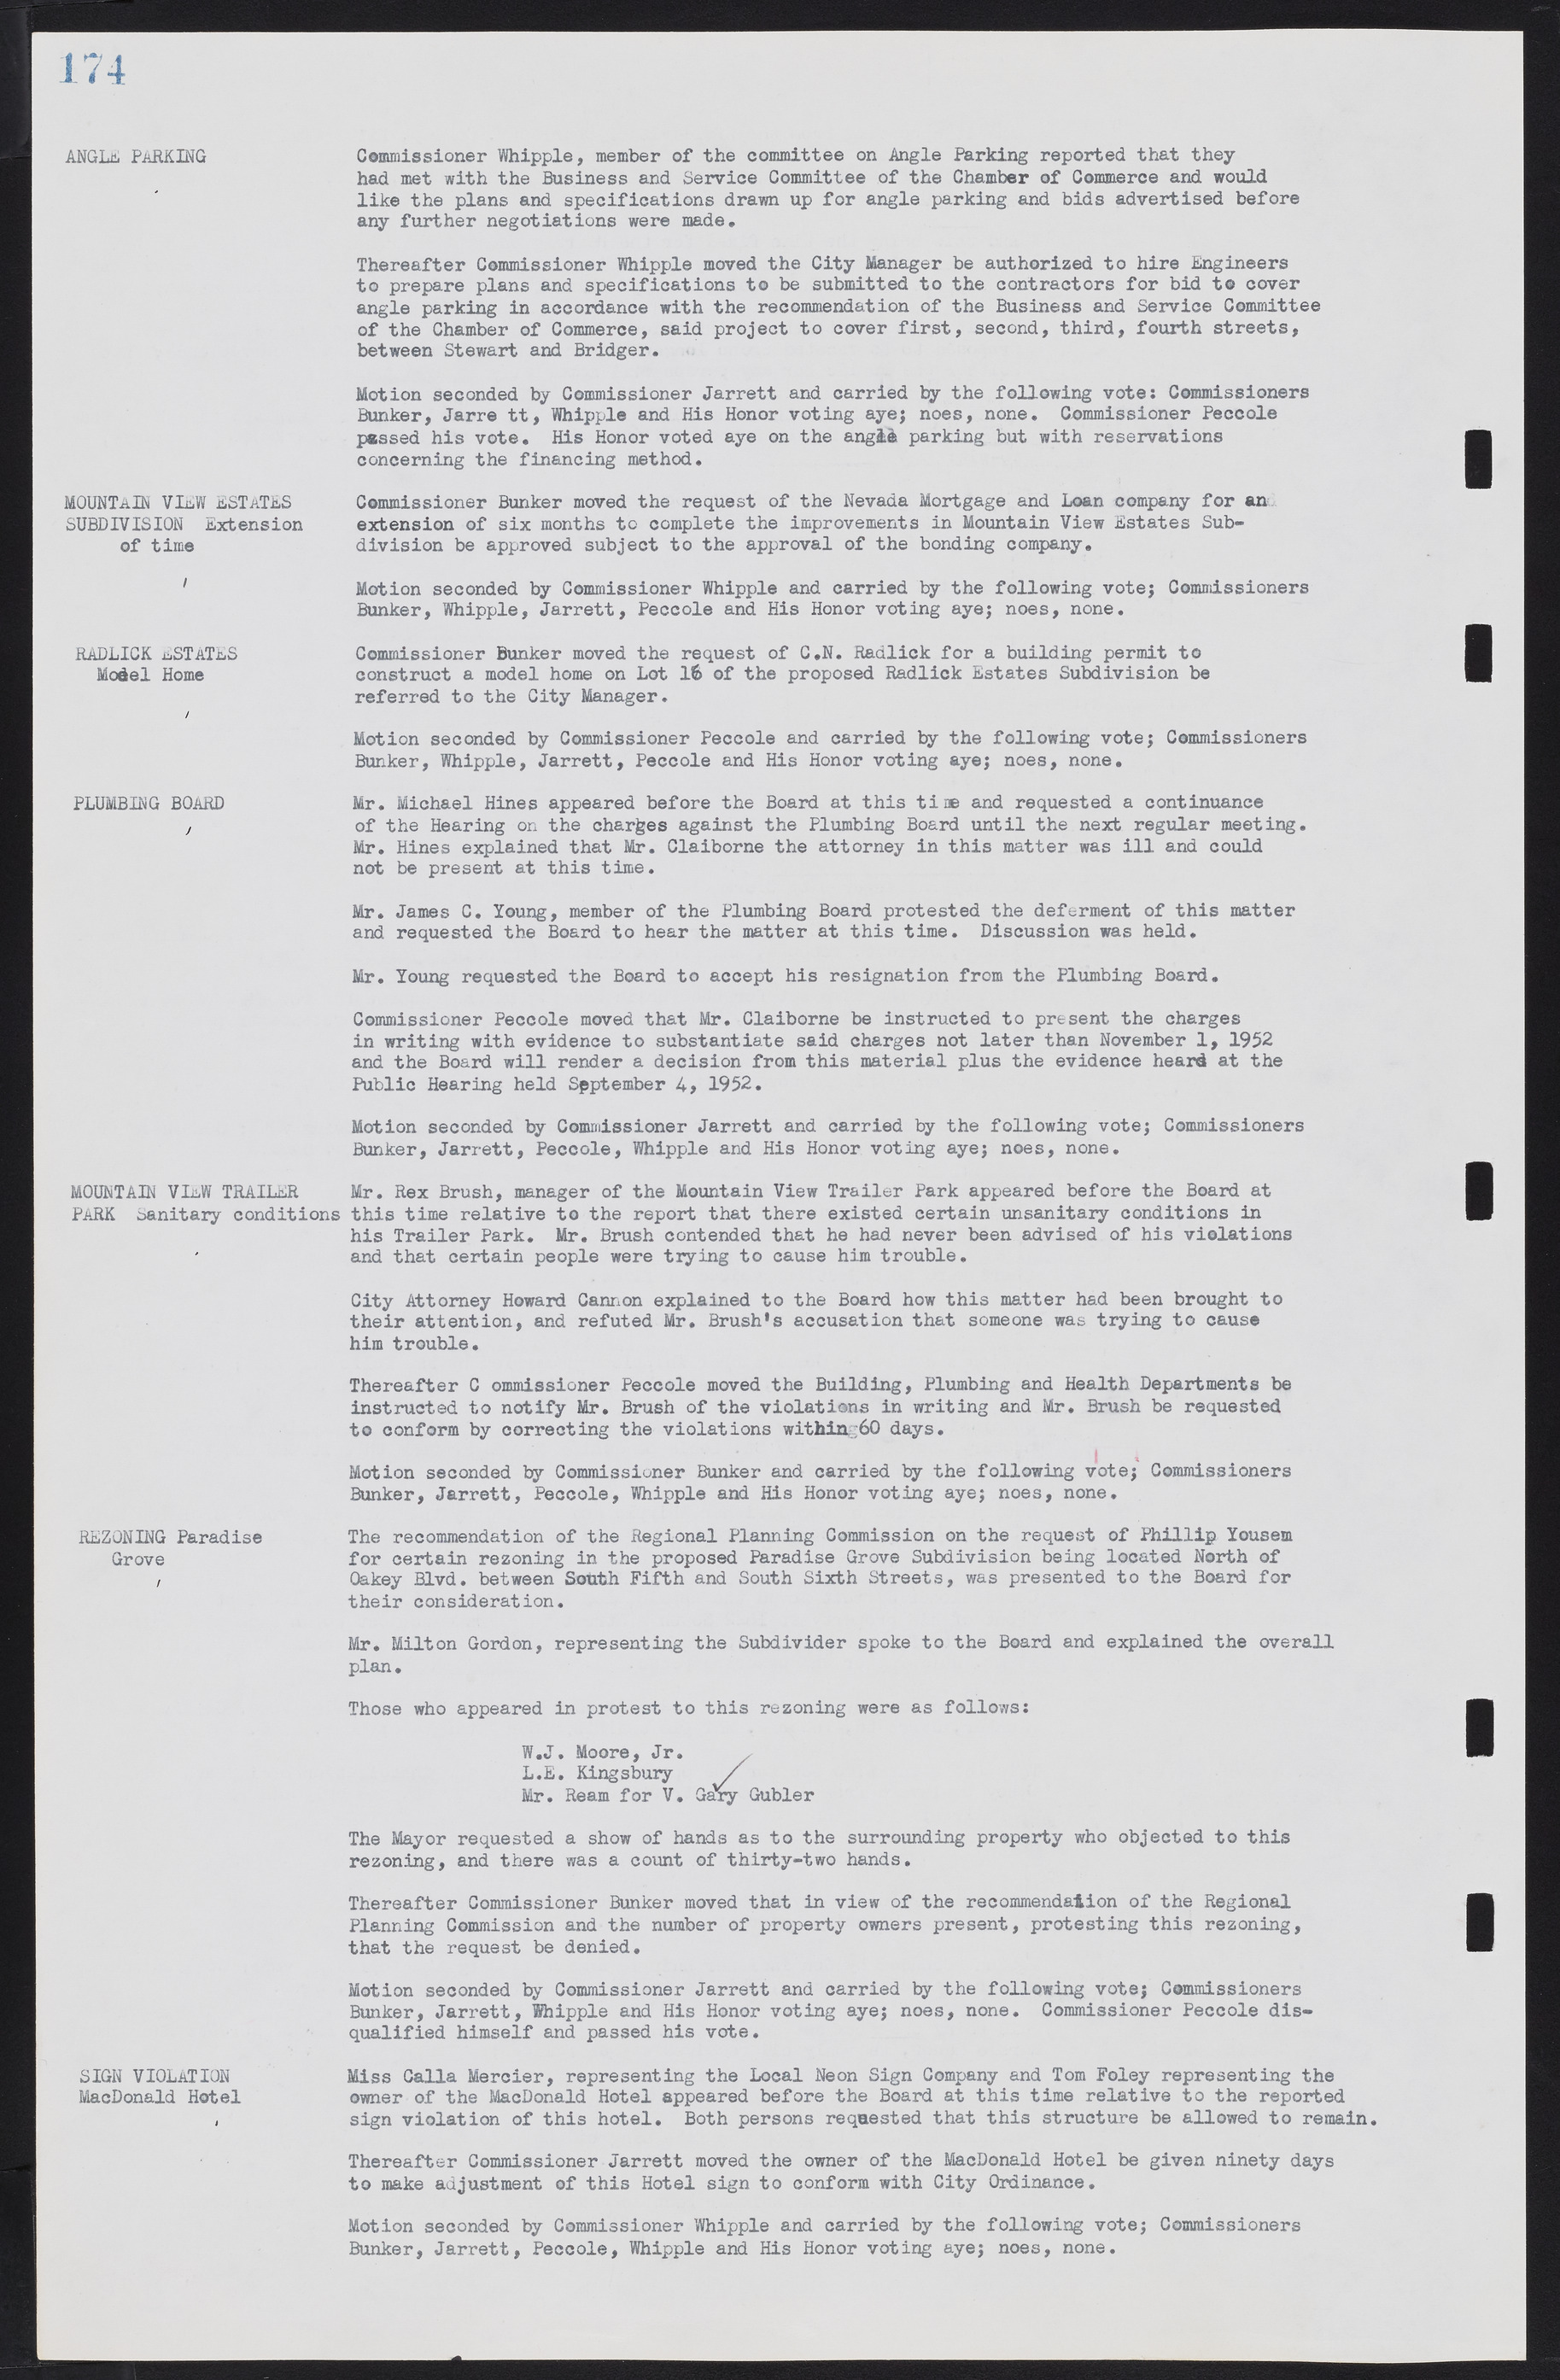 Las Vegas City Commission Minutes, May 26, 1952 to February 17, 1954, lvc000008-188